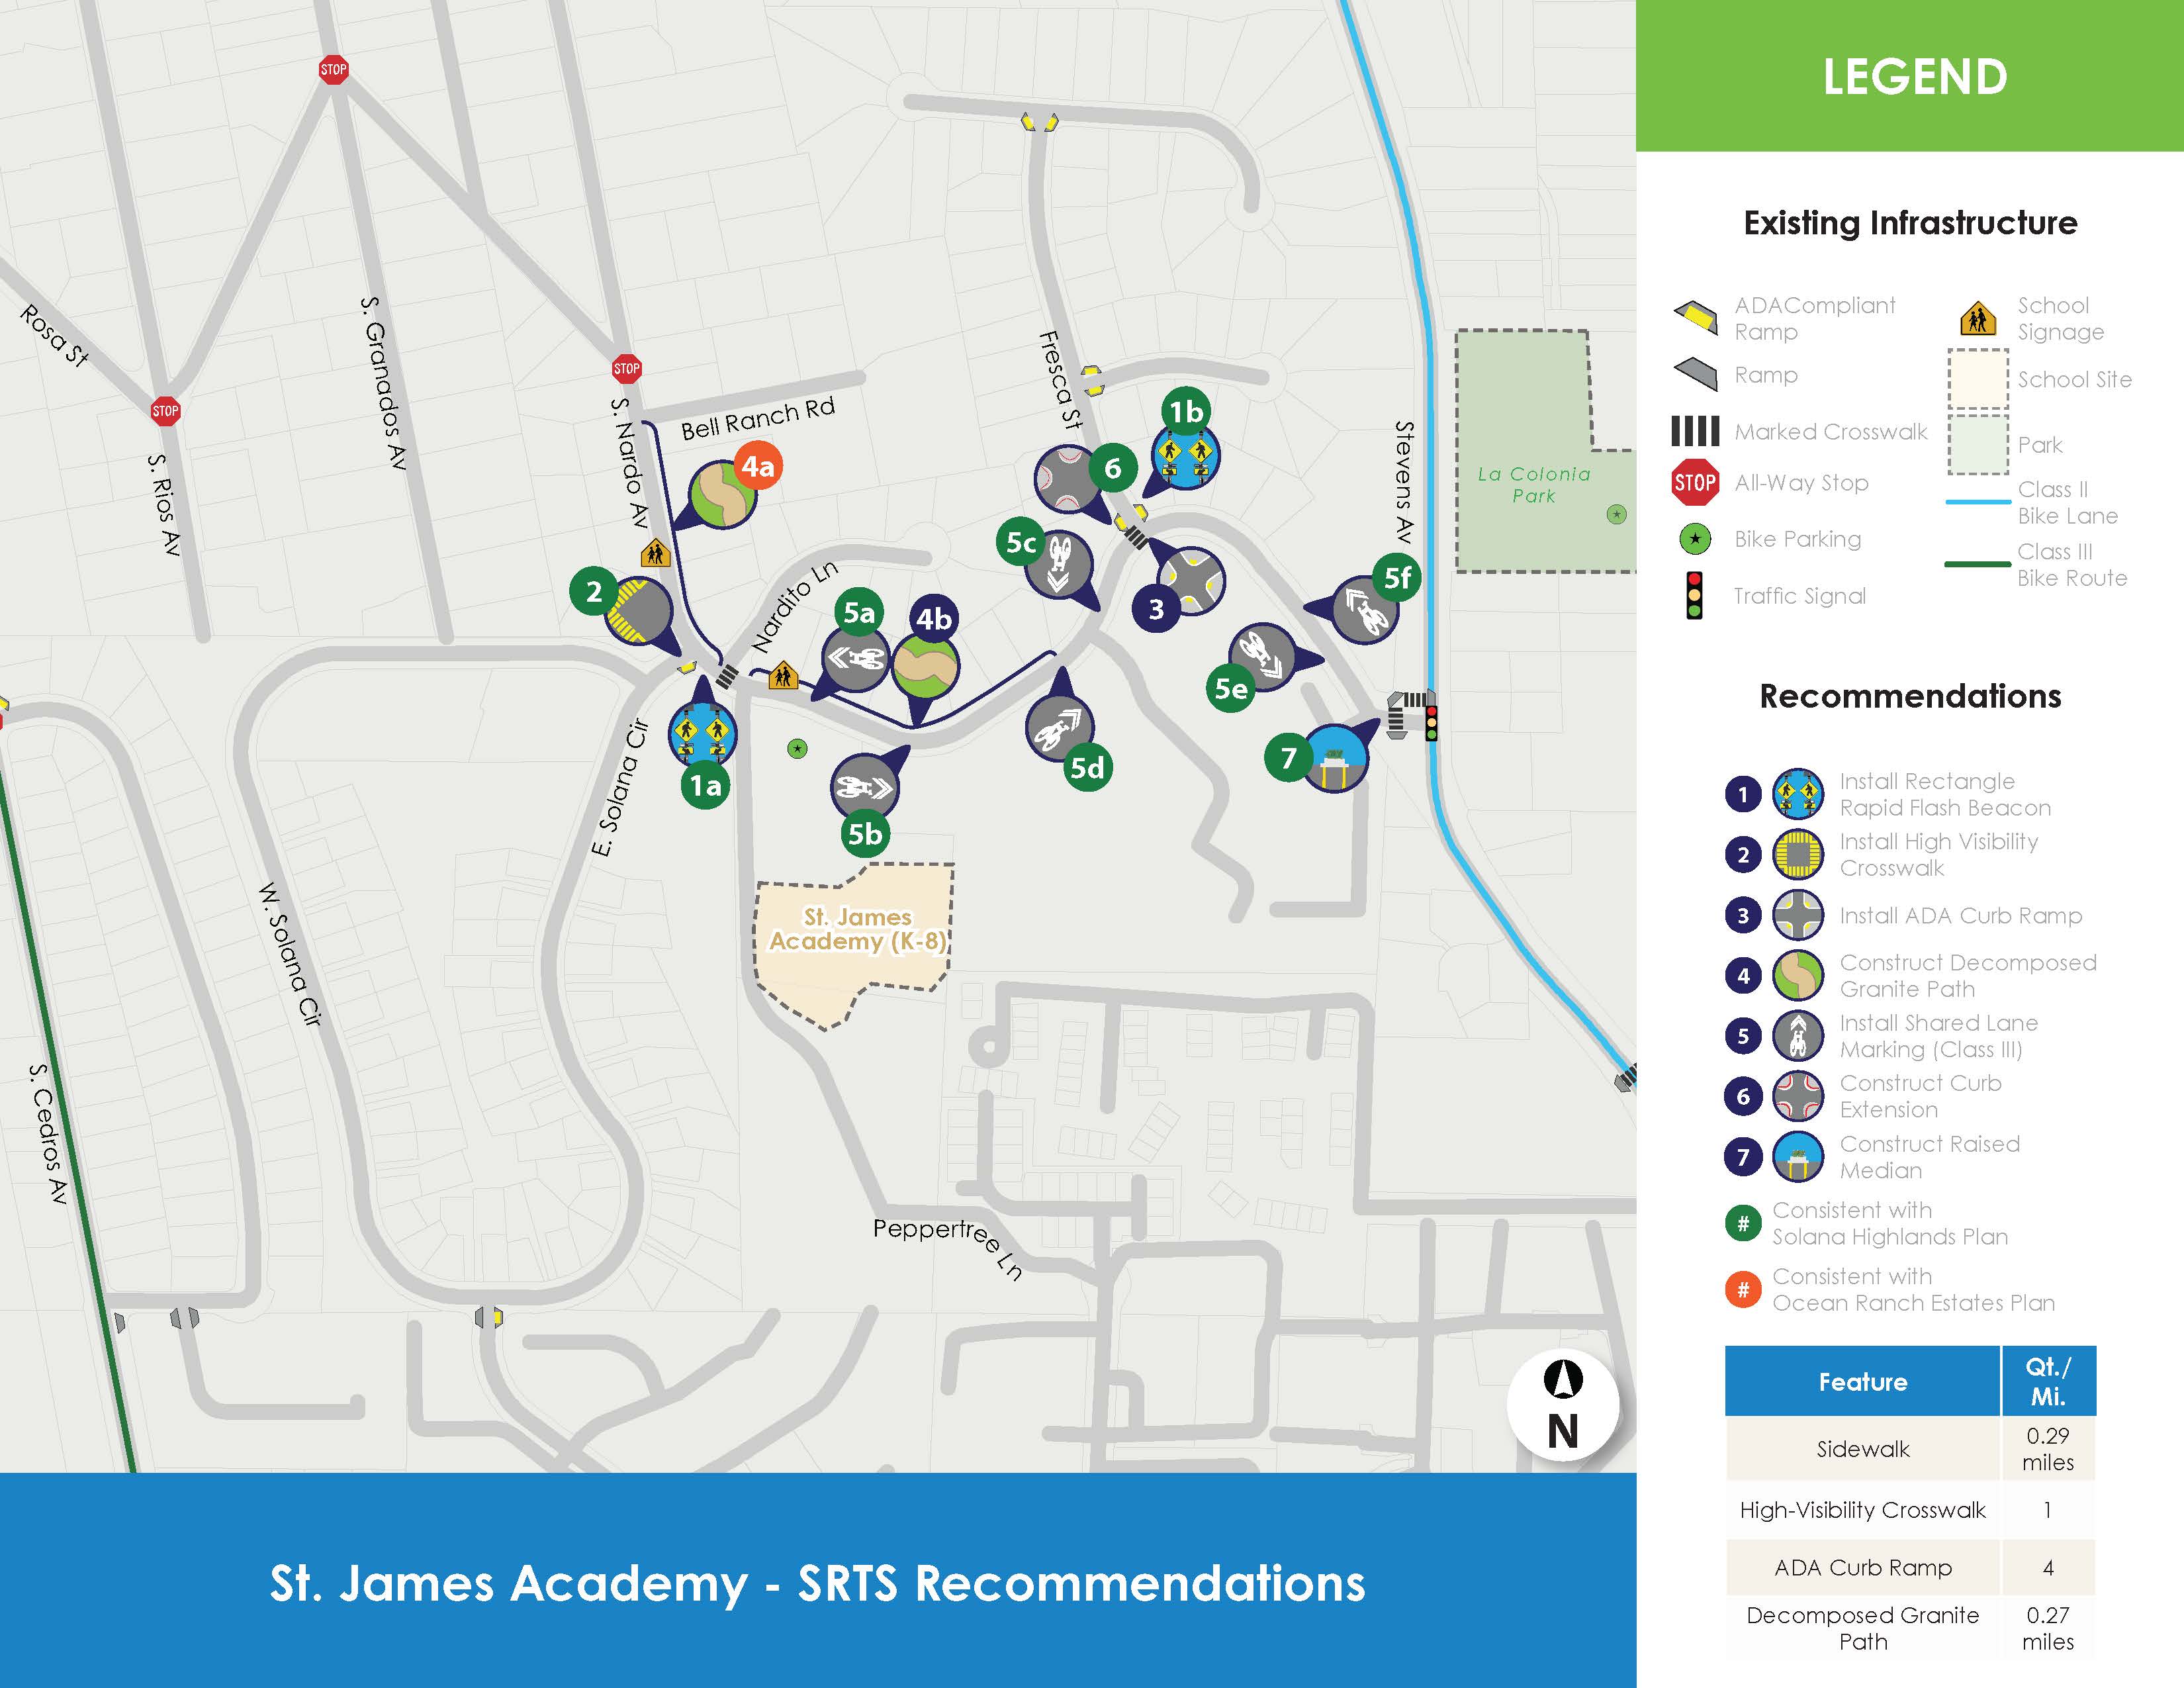 Recommendations for St. James Academy